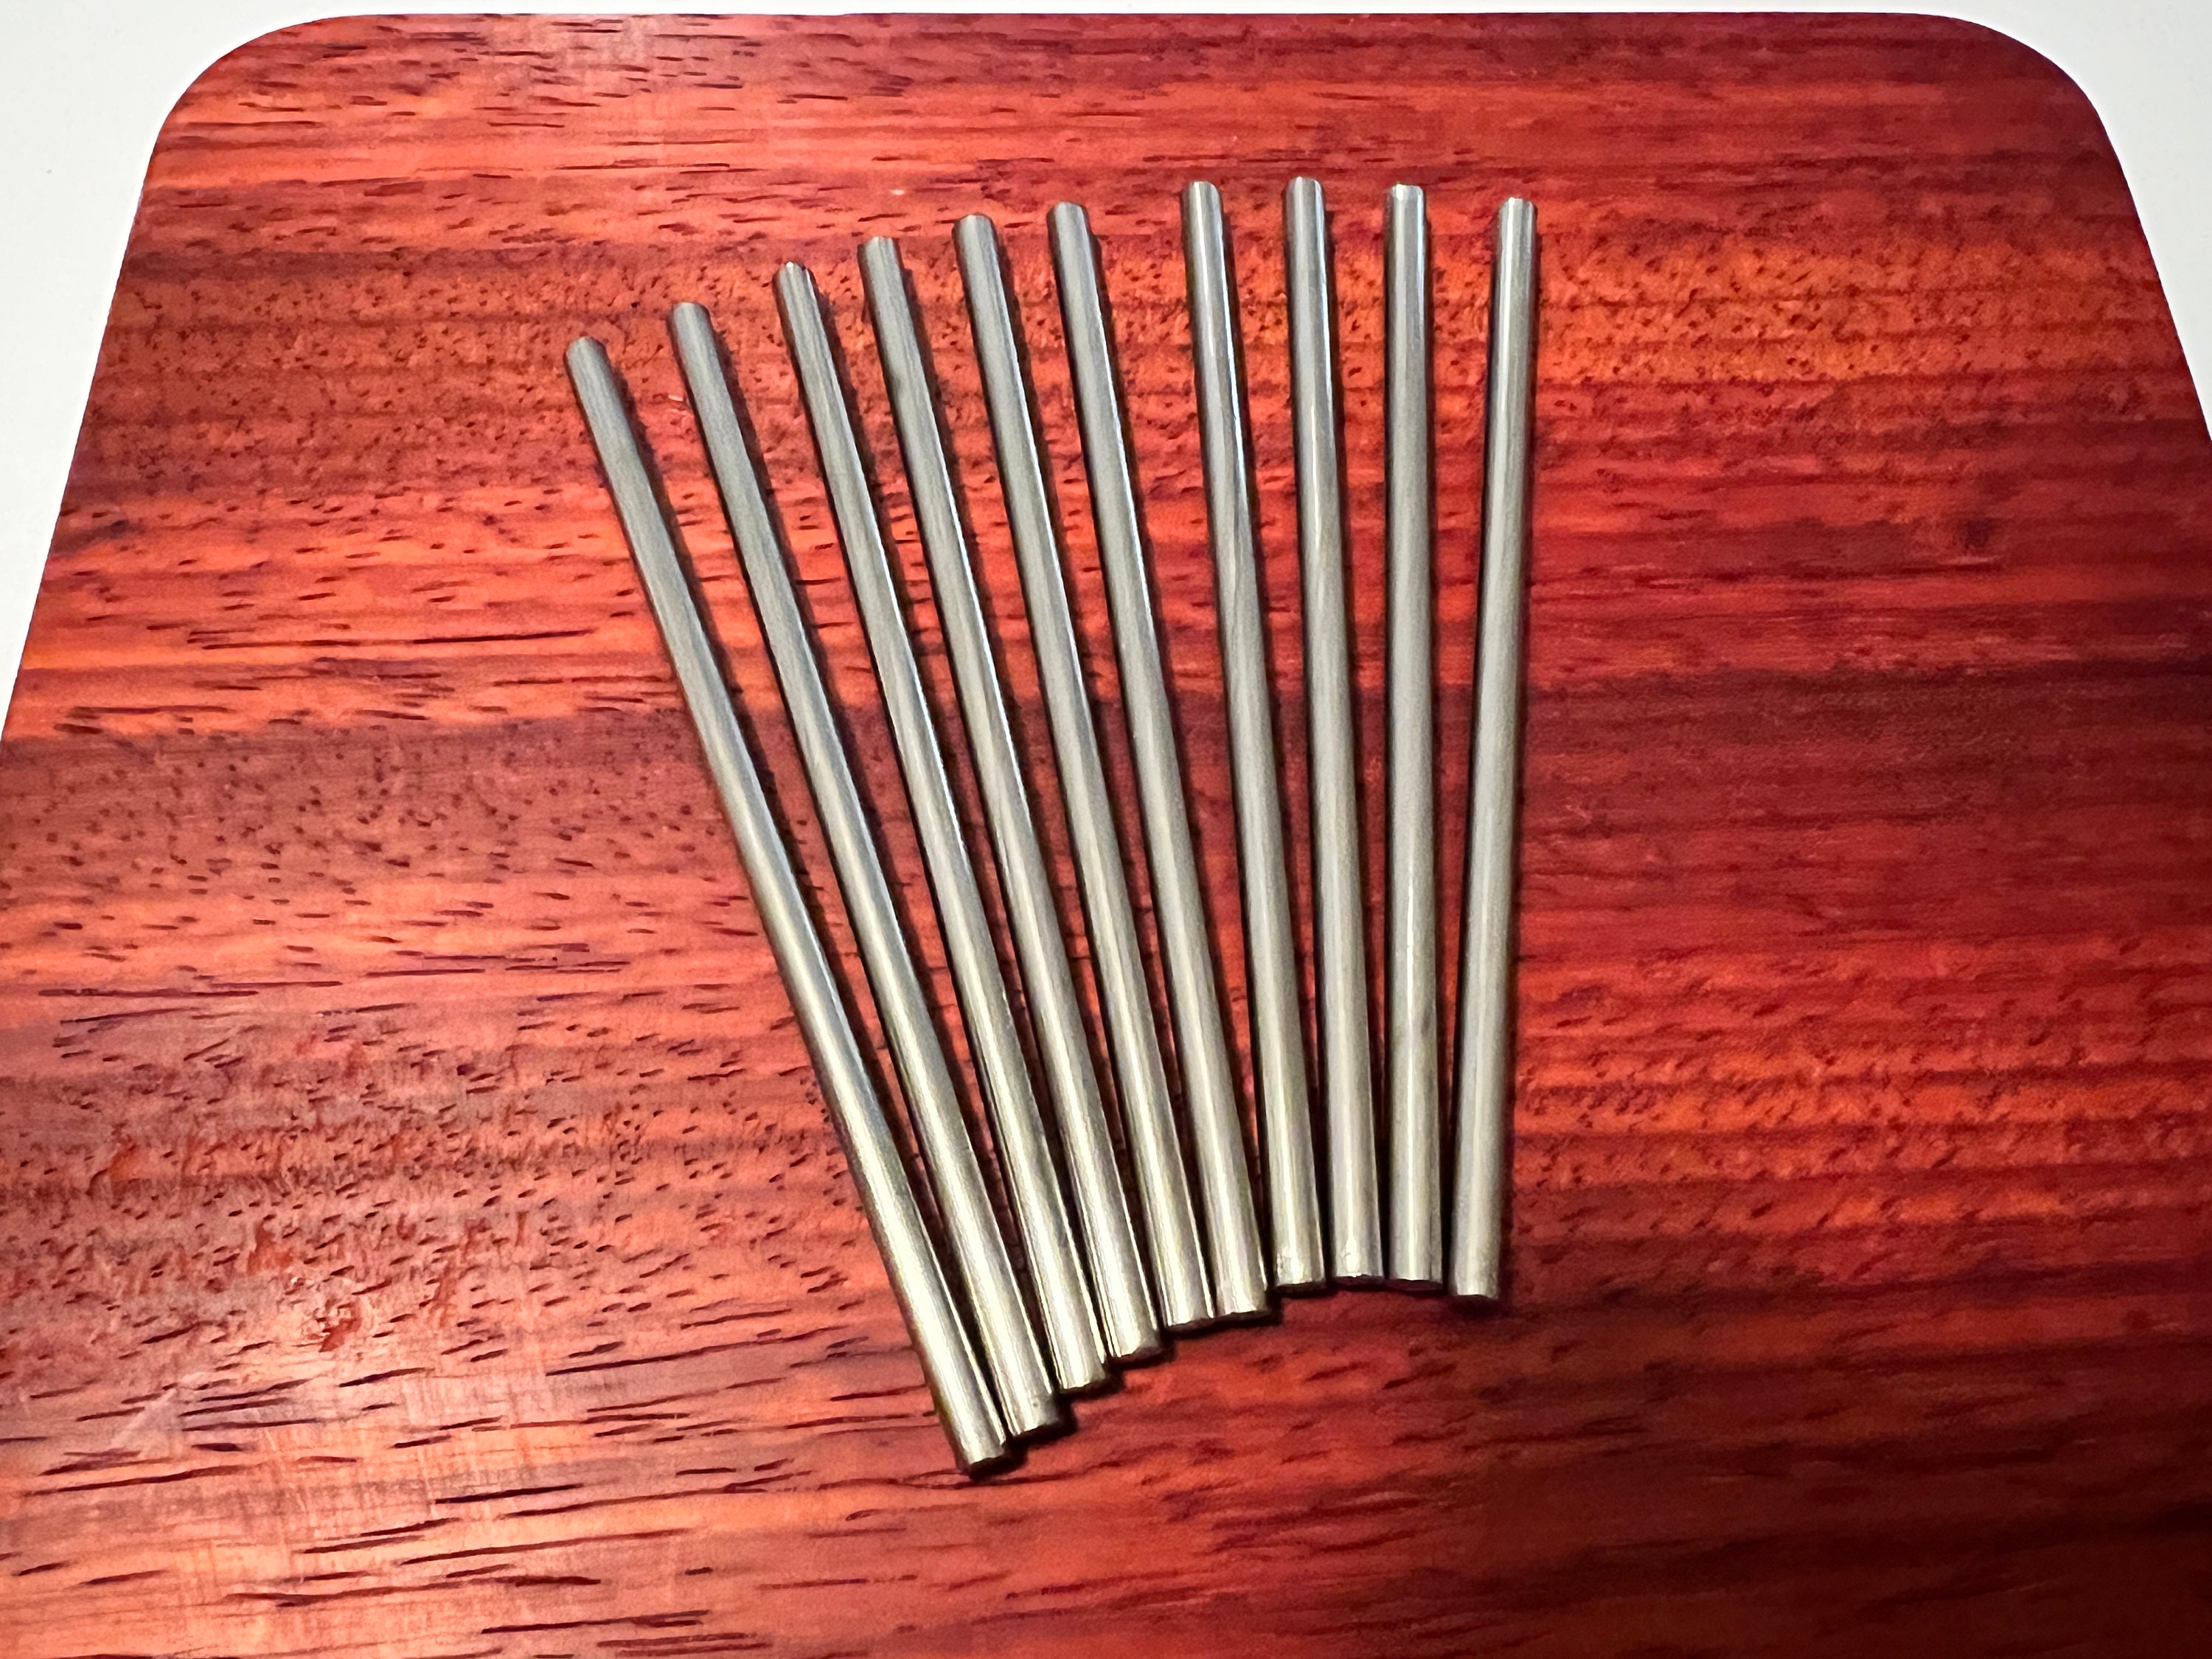 40 Stainless Steel Fork Blocking Pins. U-shape Pins in a Reusable Clear  Acrylic Box. for Wet and Steam Blocking. Clover 3163 